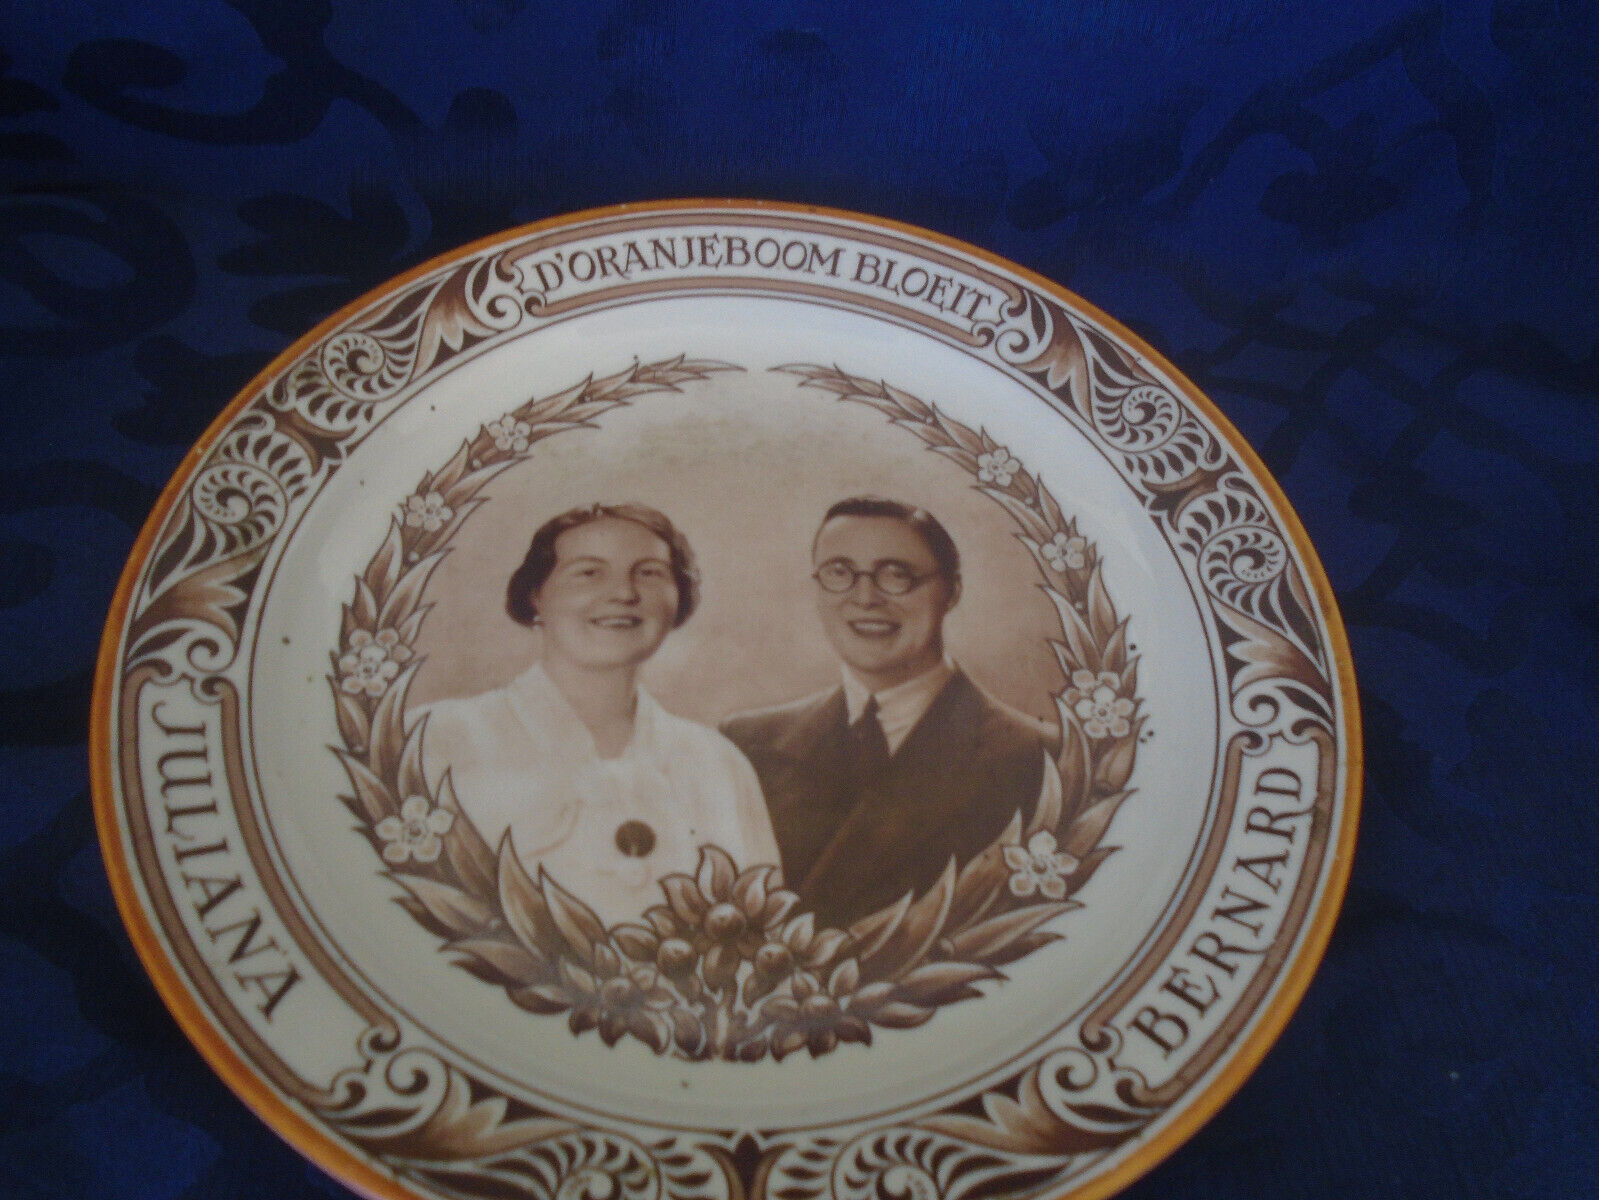 RARE Plate commorating the engagement of Queen Juliana and Prince Bernard